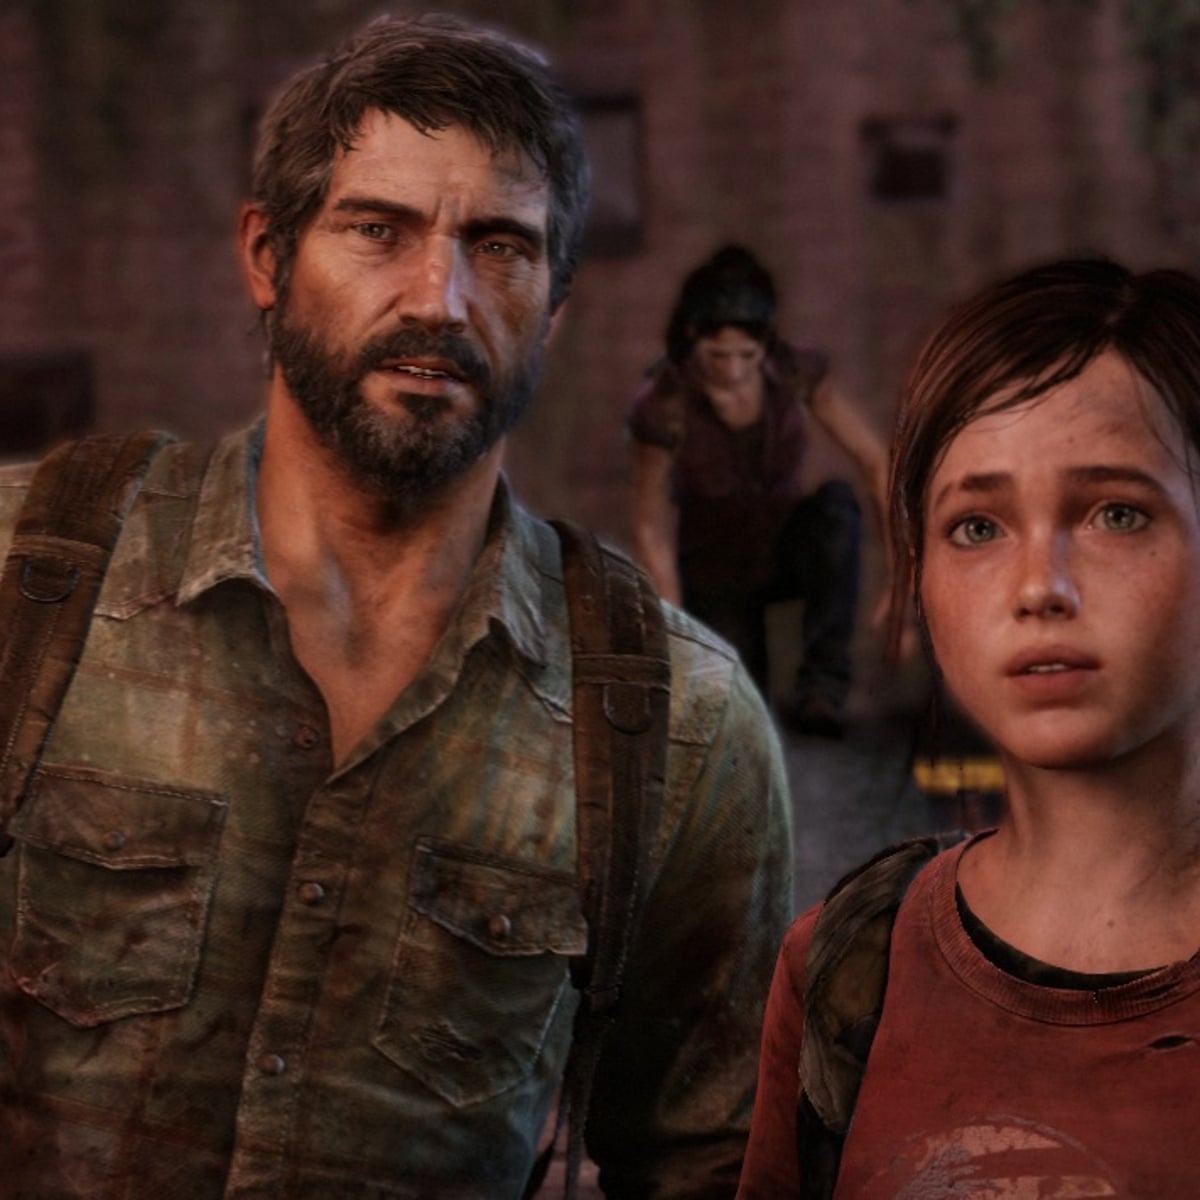 Naughty Dog really wants you to understand The Last of Us Part 1